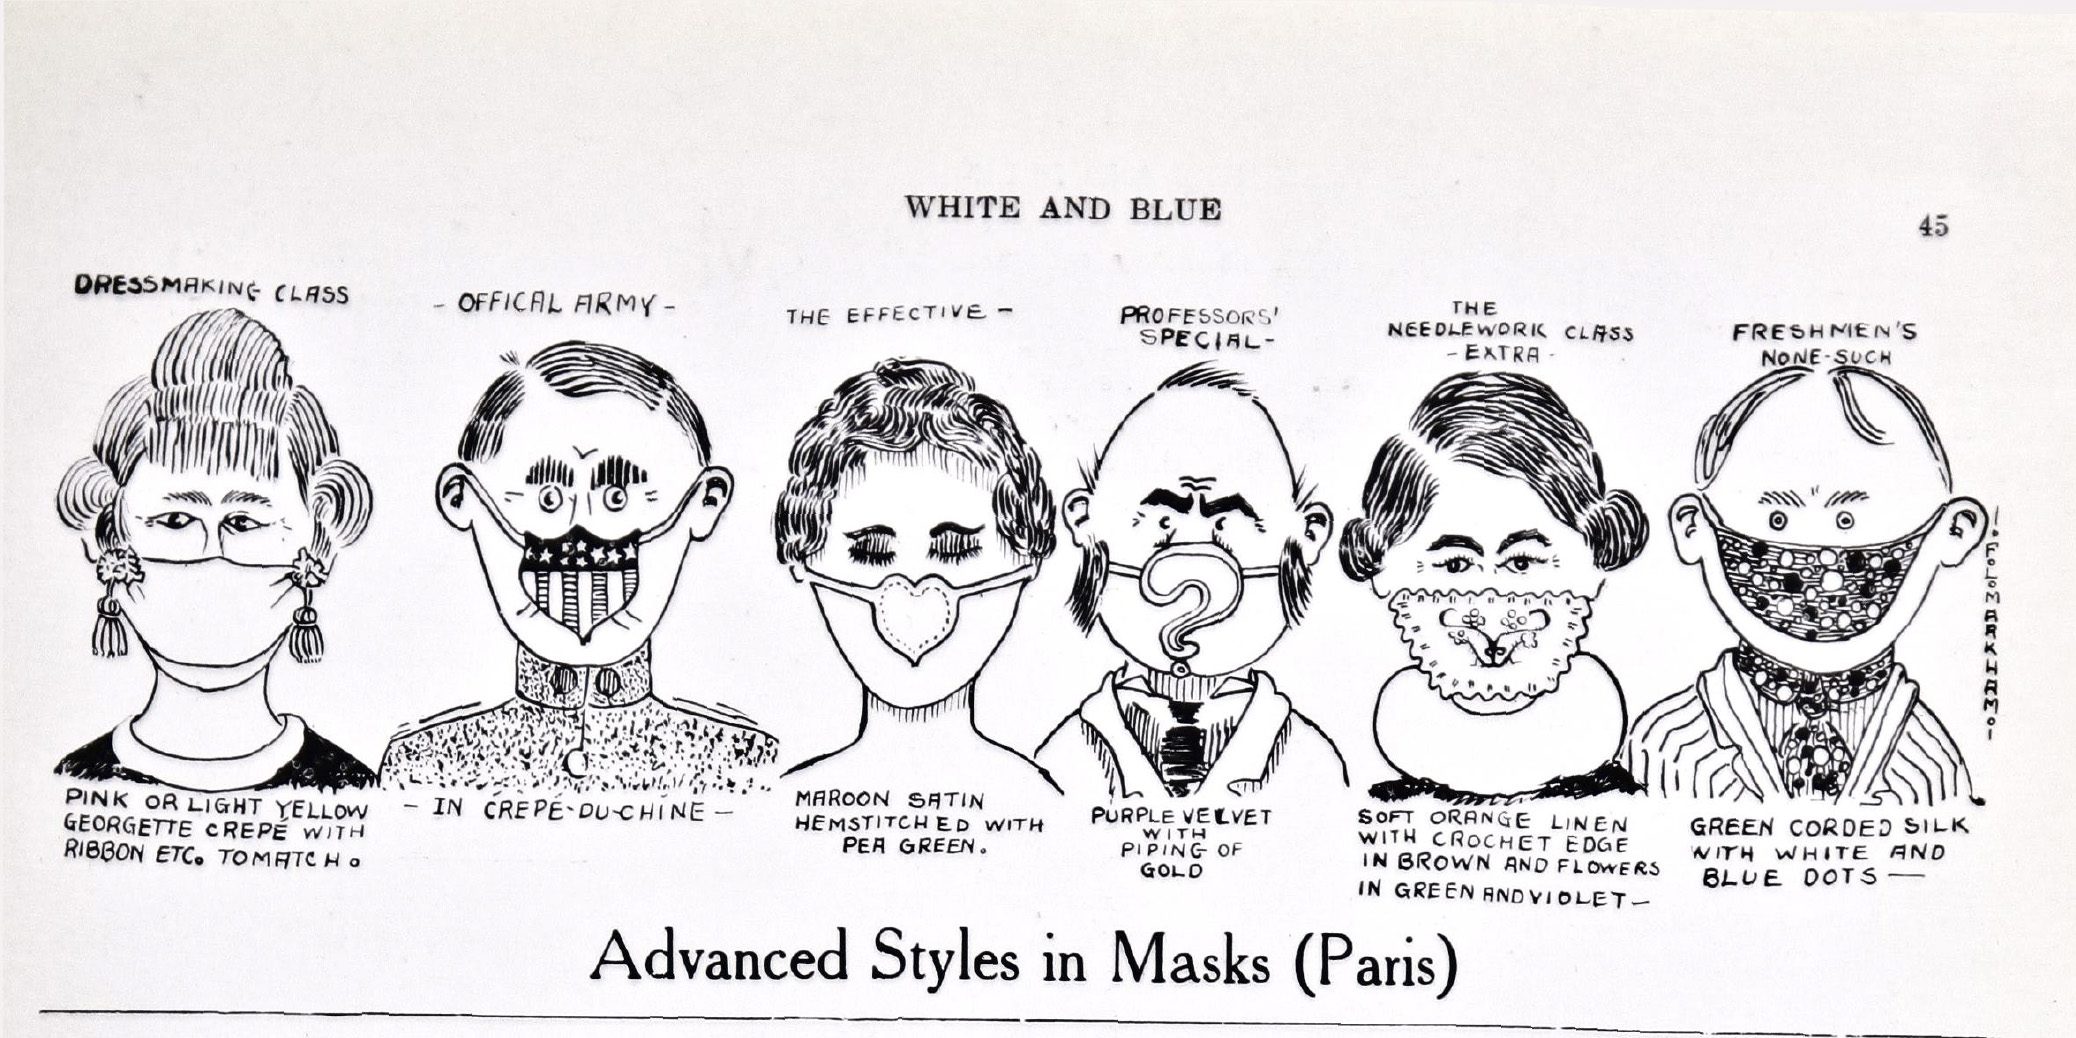 A cartoon from early 1919 in BYU's student newspaper showing various styles of medical masks to fight the 1918 flu. The caption reads, "Advanced Styles in Masks (Paris)."